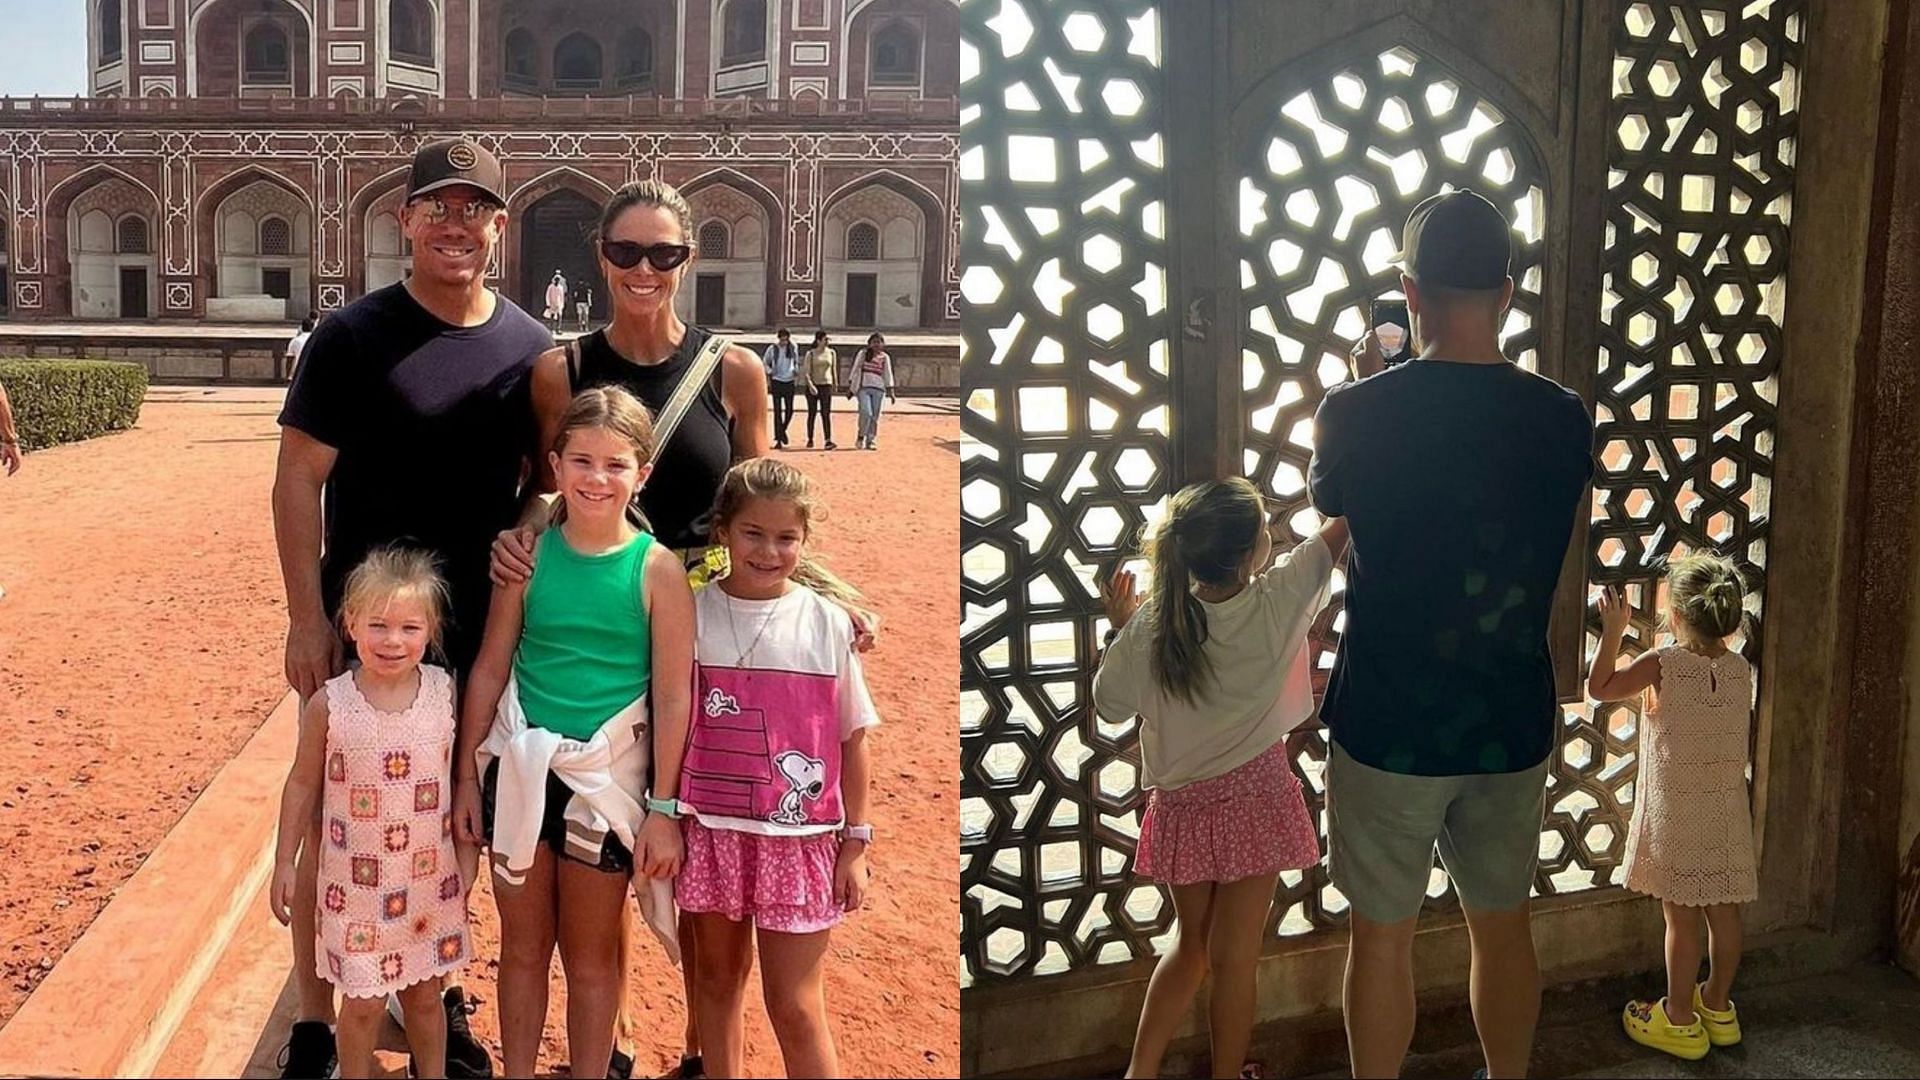 Day out with the family"- David Warner visits Humayun Tomb with his wife  and kids, posts 10 photos on Instagram